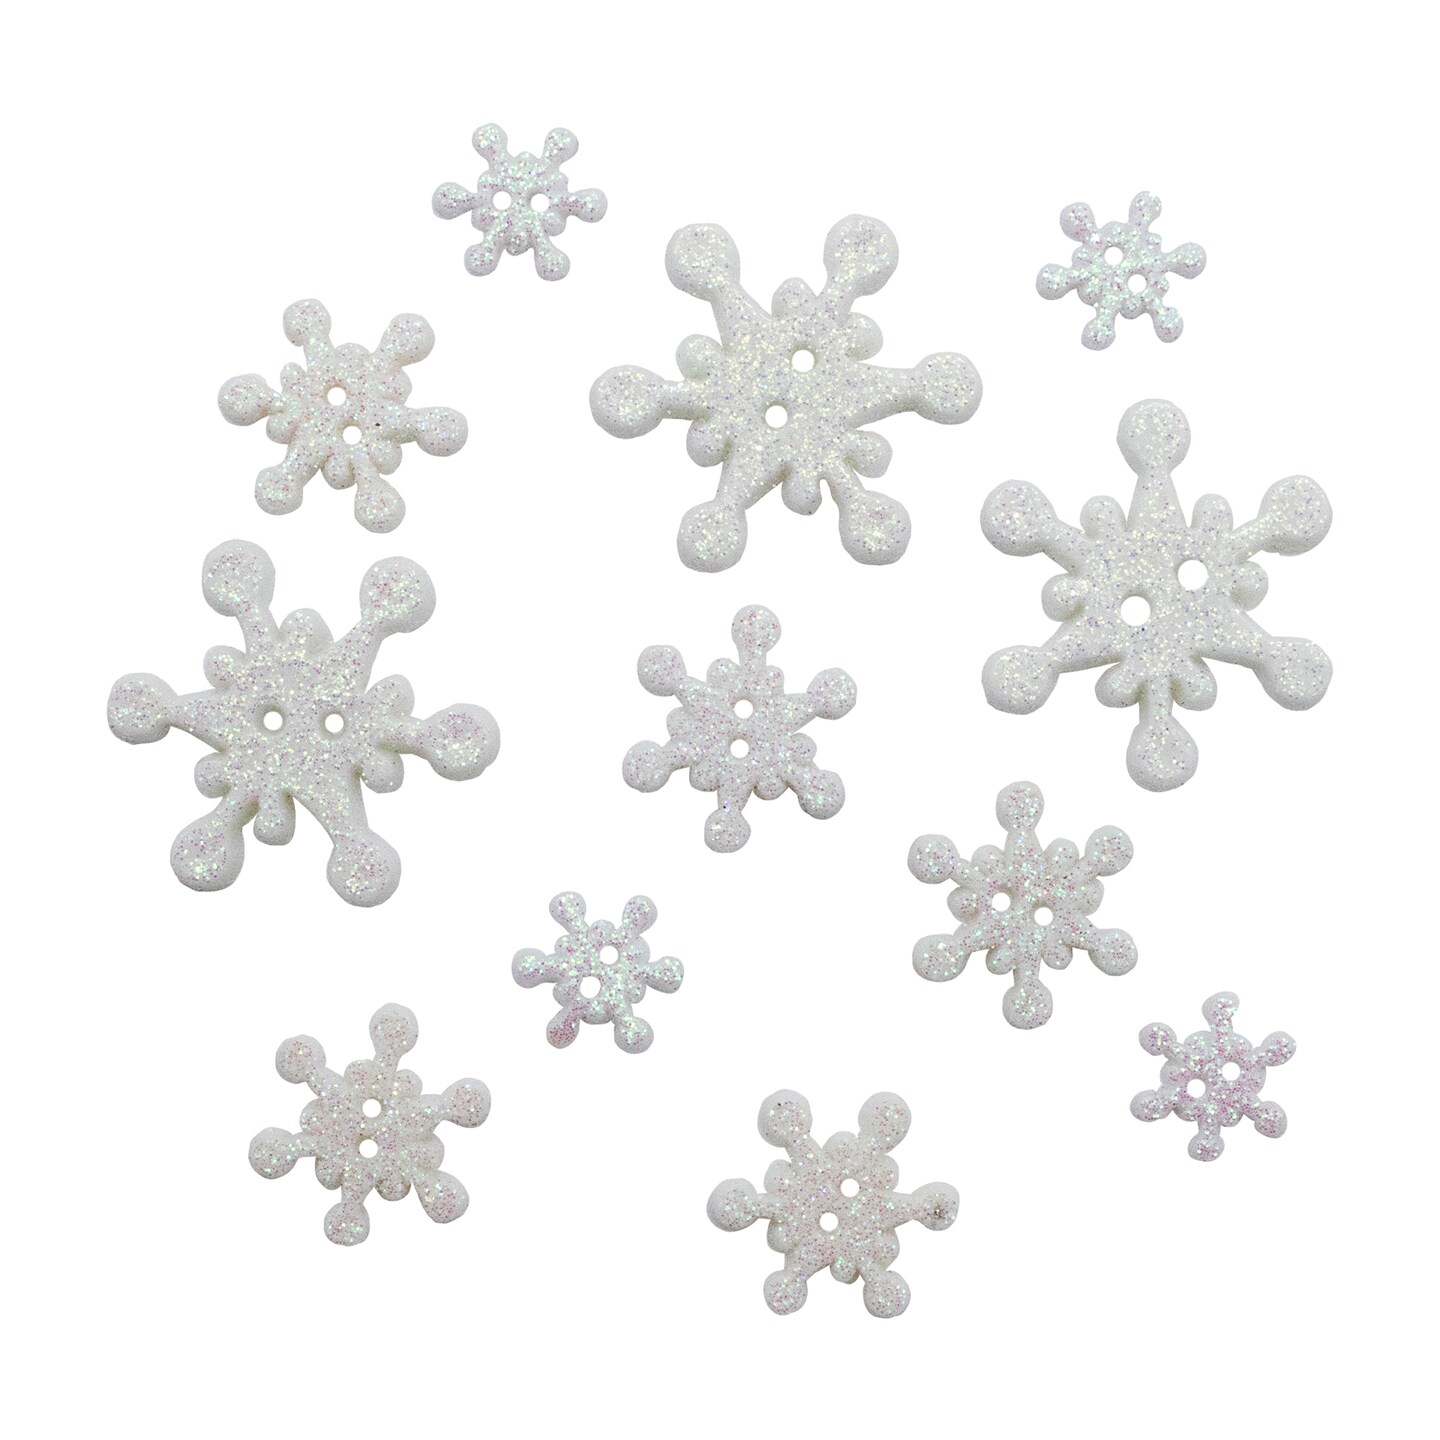 Buttons Galore Glistening Snow Christmas Buttons for Sewing Crafts Scrapbooking DIY Projects. 36 Buttons - 3 Packs